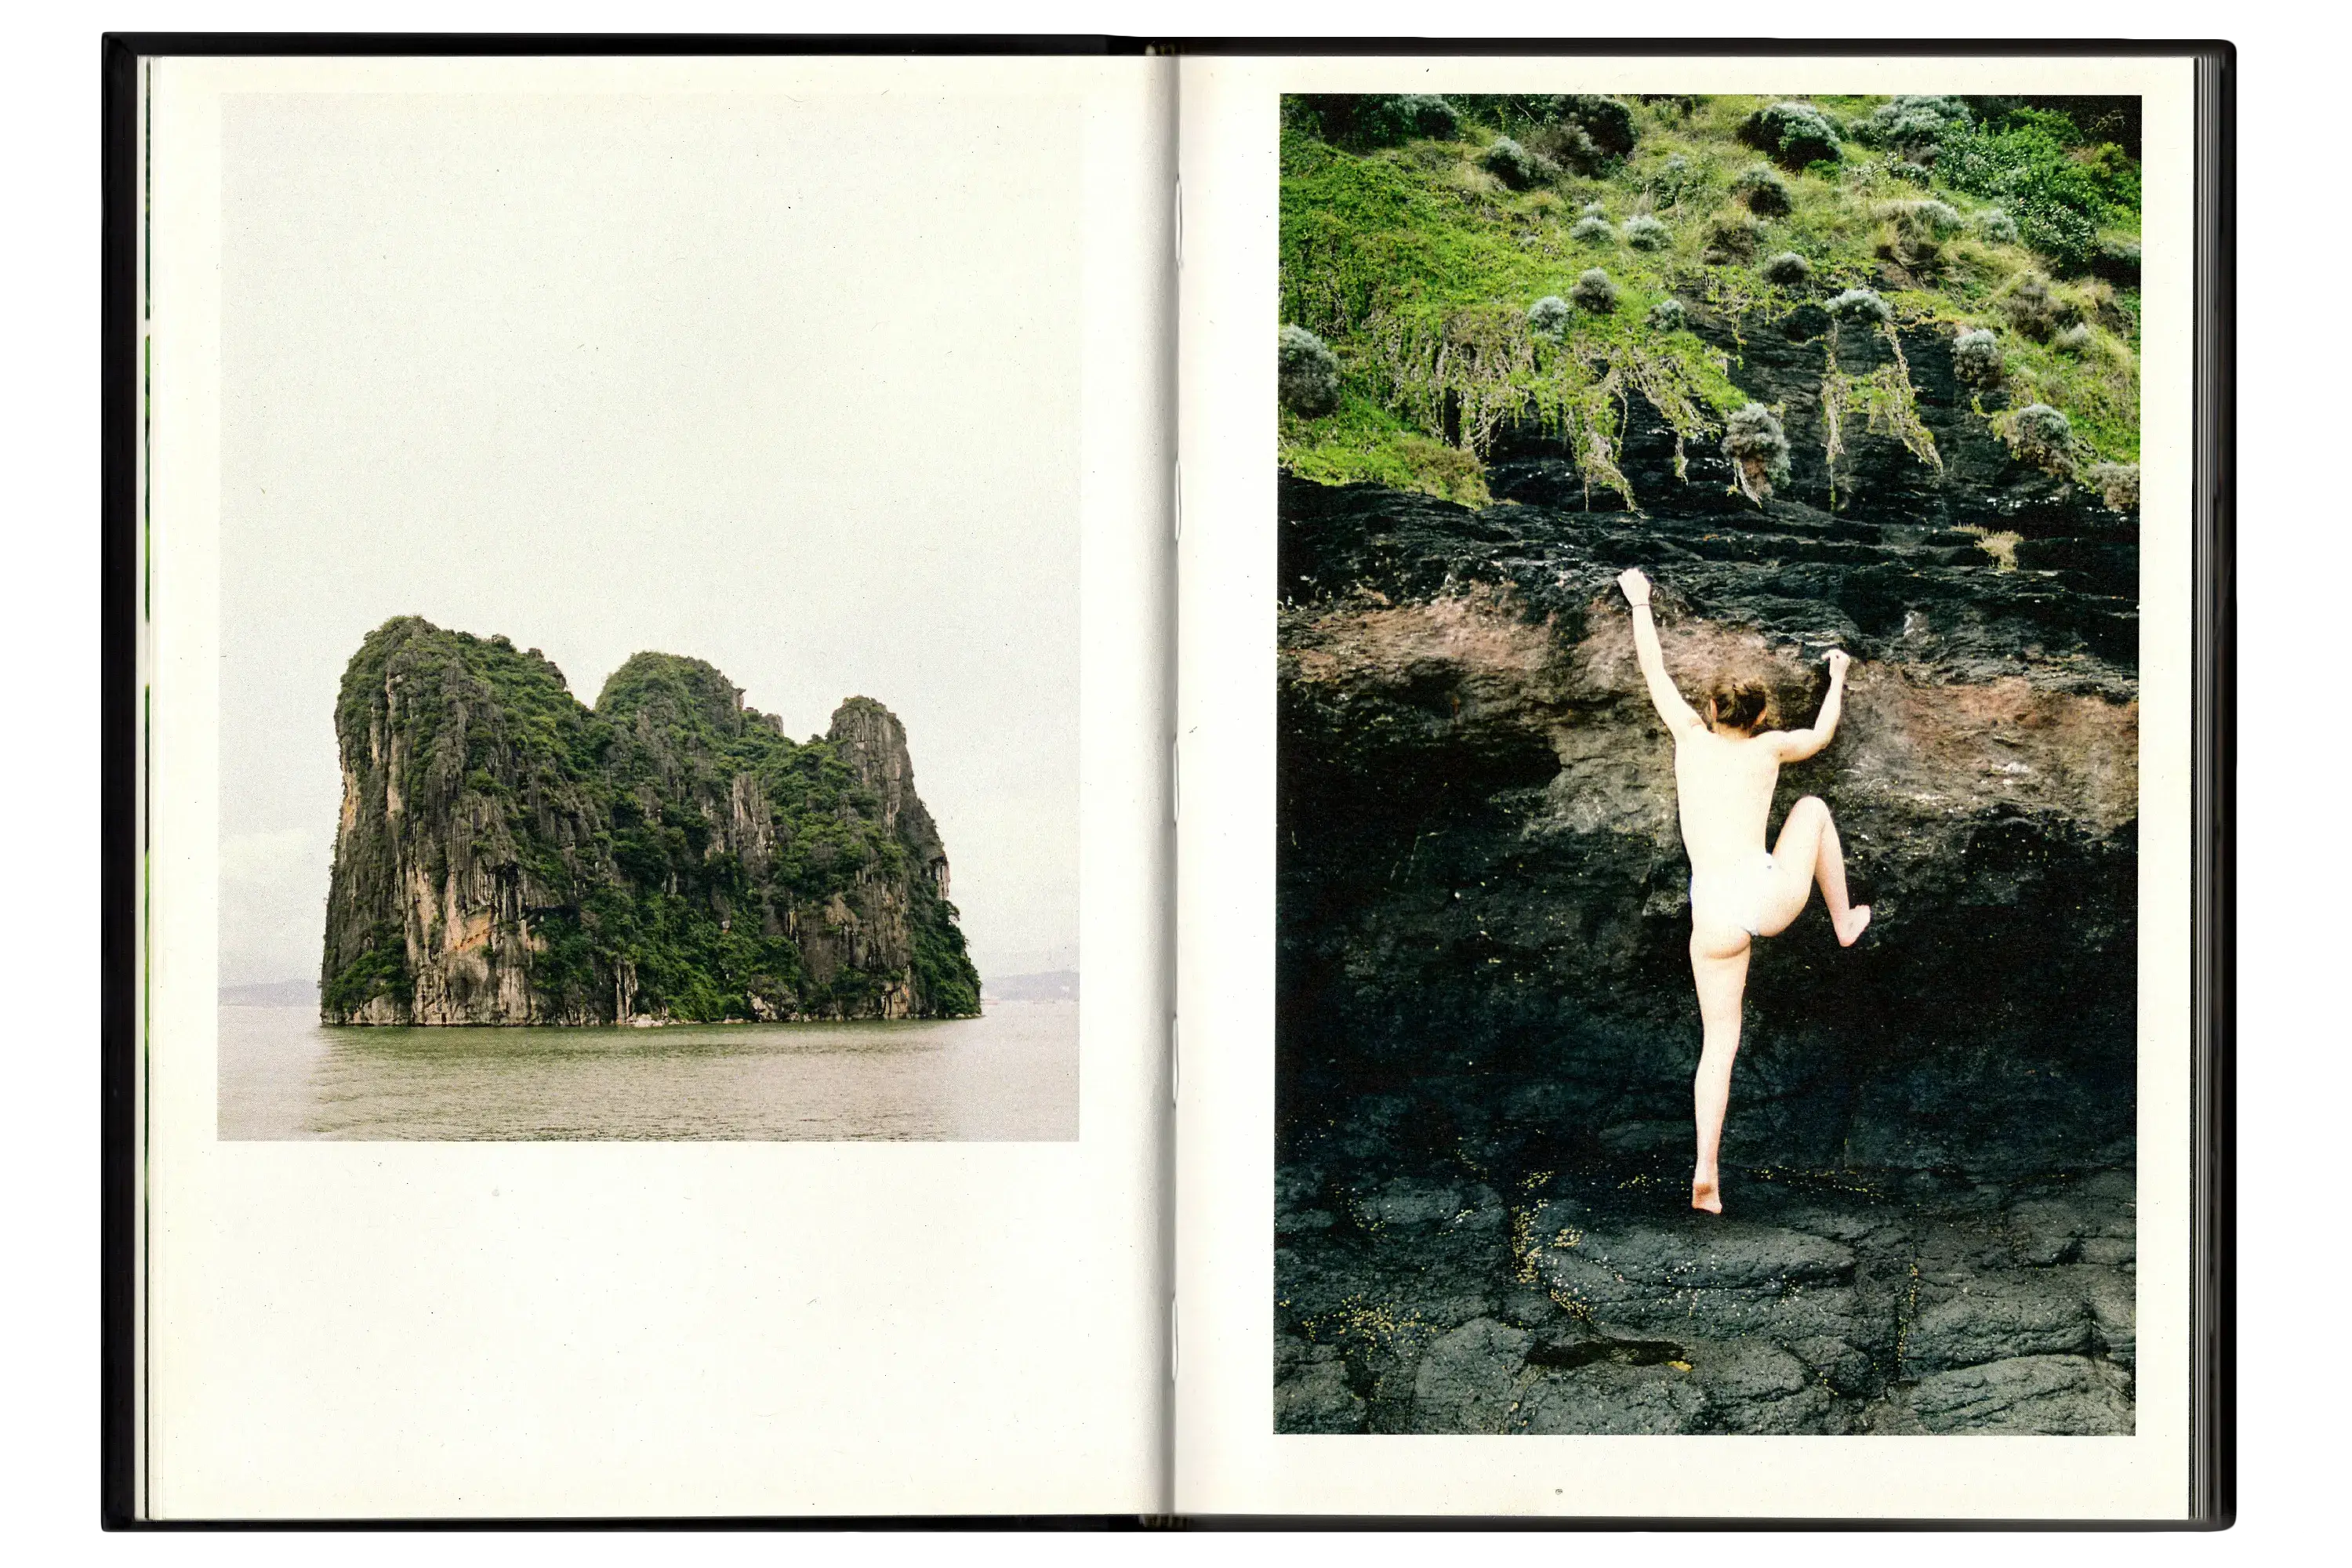 Imperfect Photo Book - left page shows a rock covered in vegetation standing out of the ocean, right page shows woman climbing rock